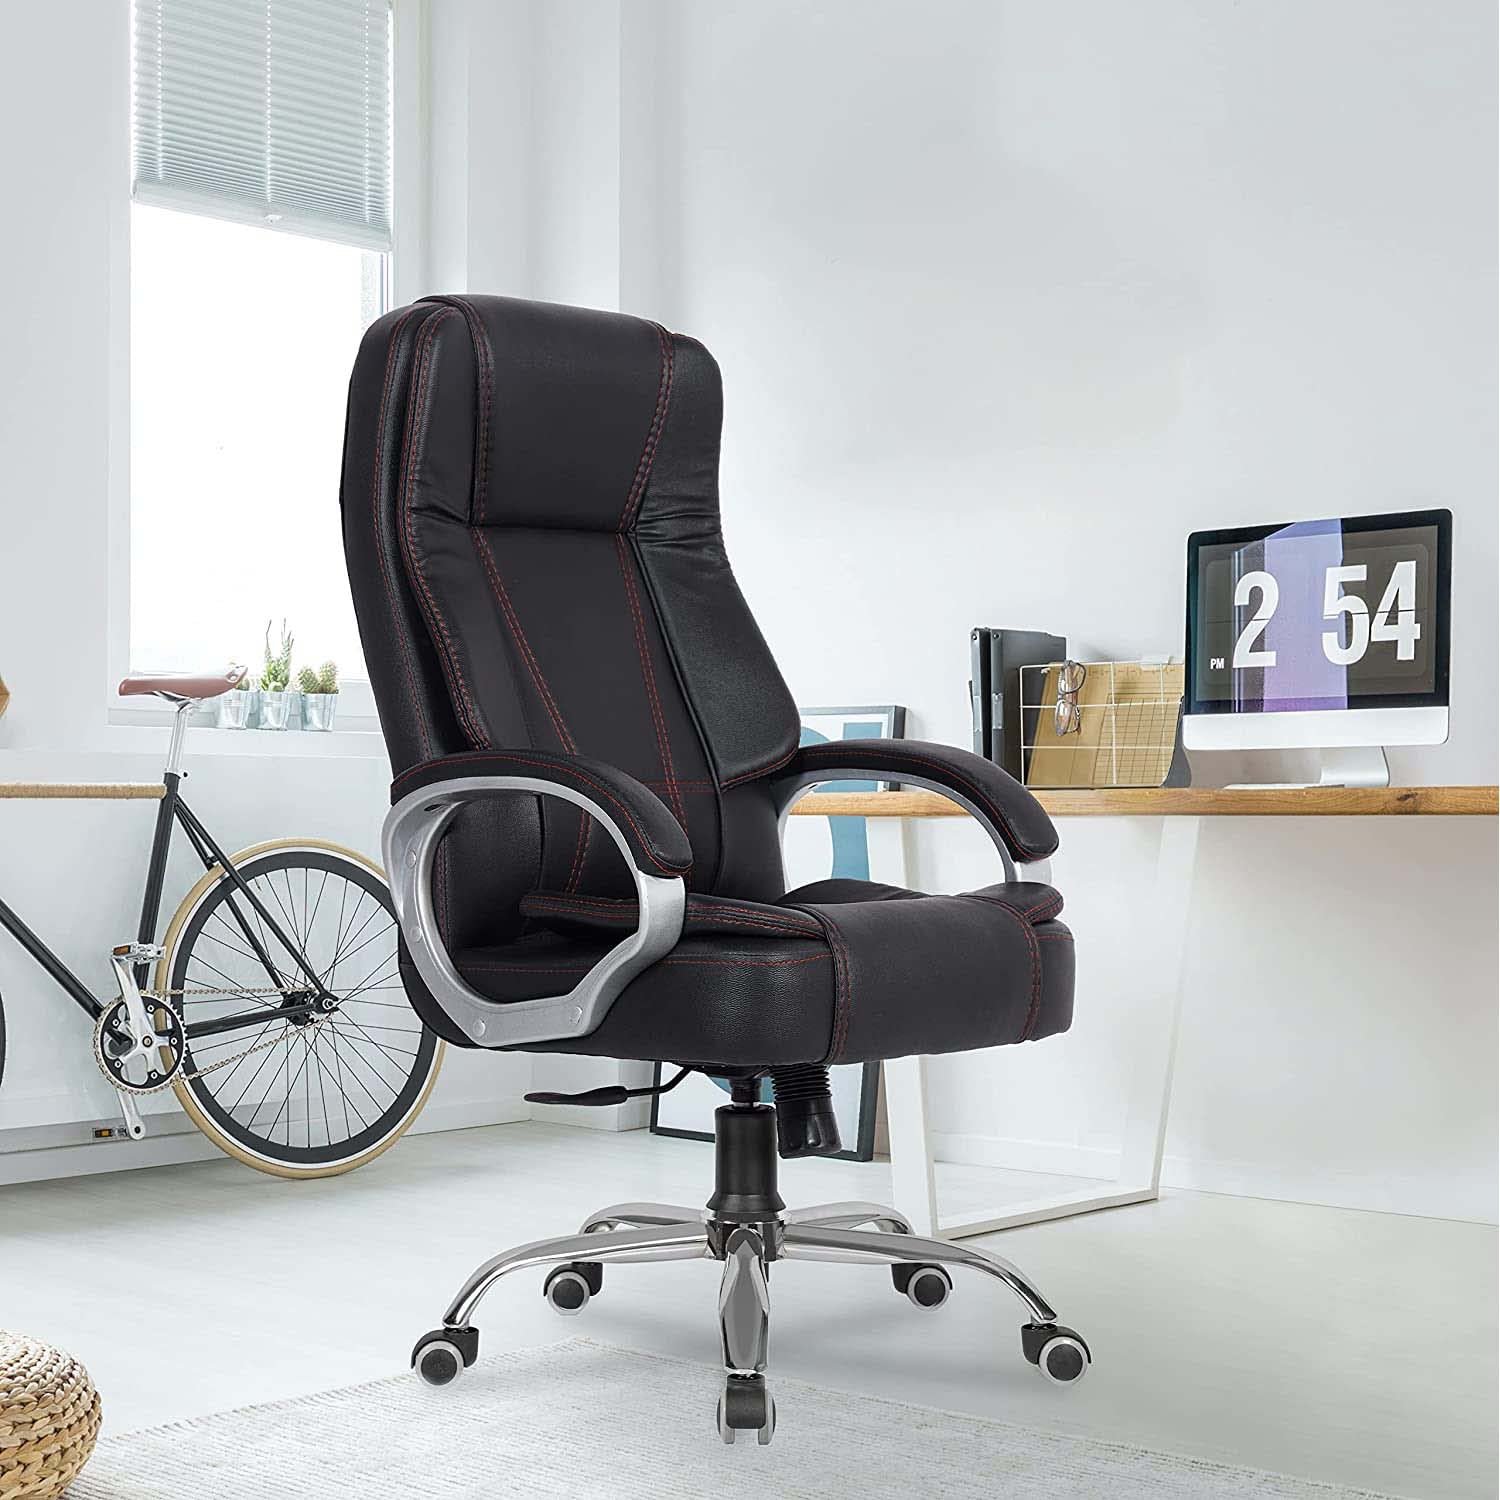 Green Soul® Vienna Premium Leatherette Office Chair, High Back Ergonomic Home Office Executive Chair